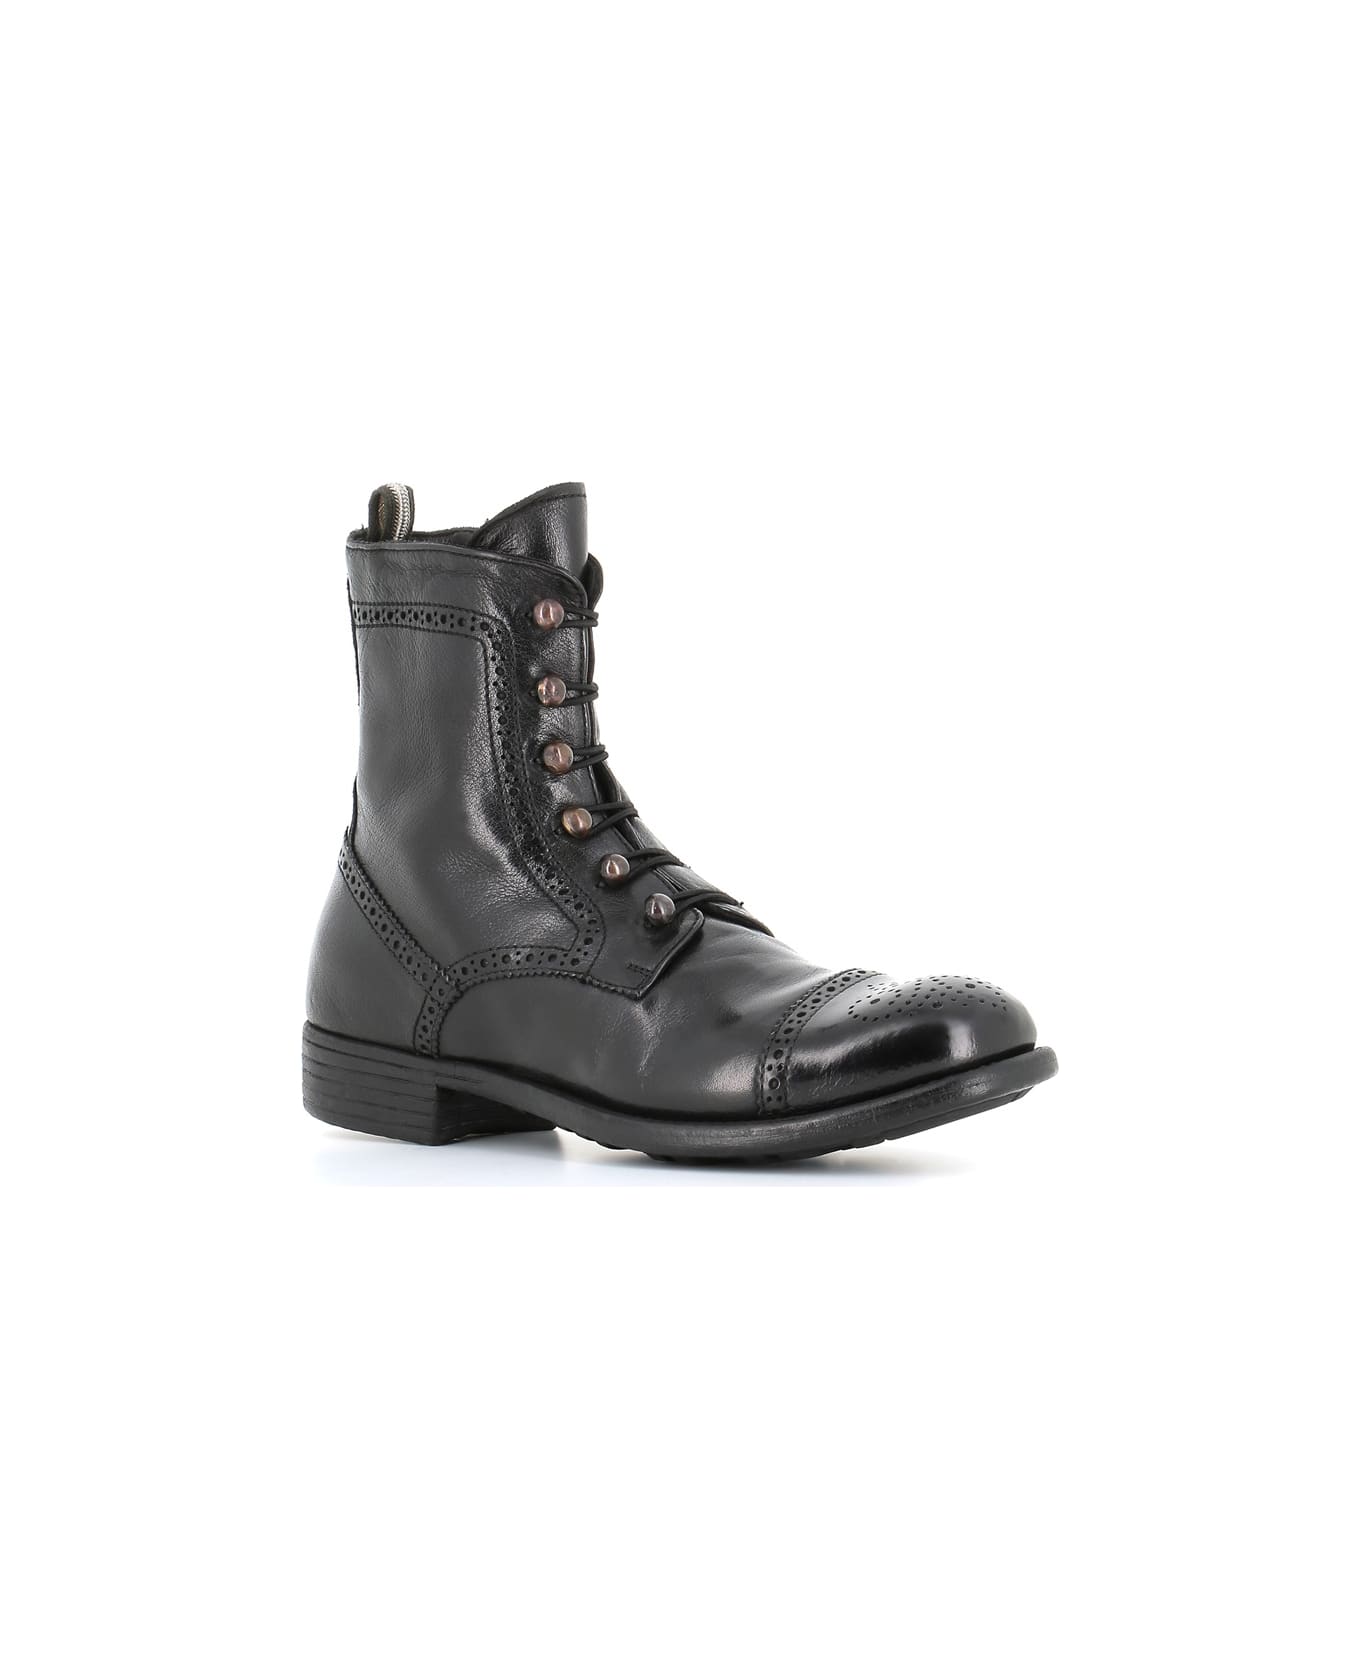 Officine Creative Lace-up Boot Calixte/023 - Black ブーツ